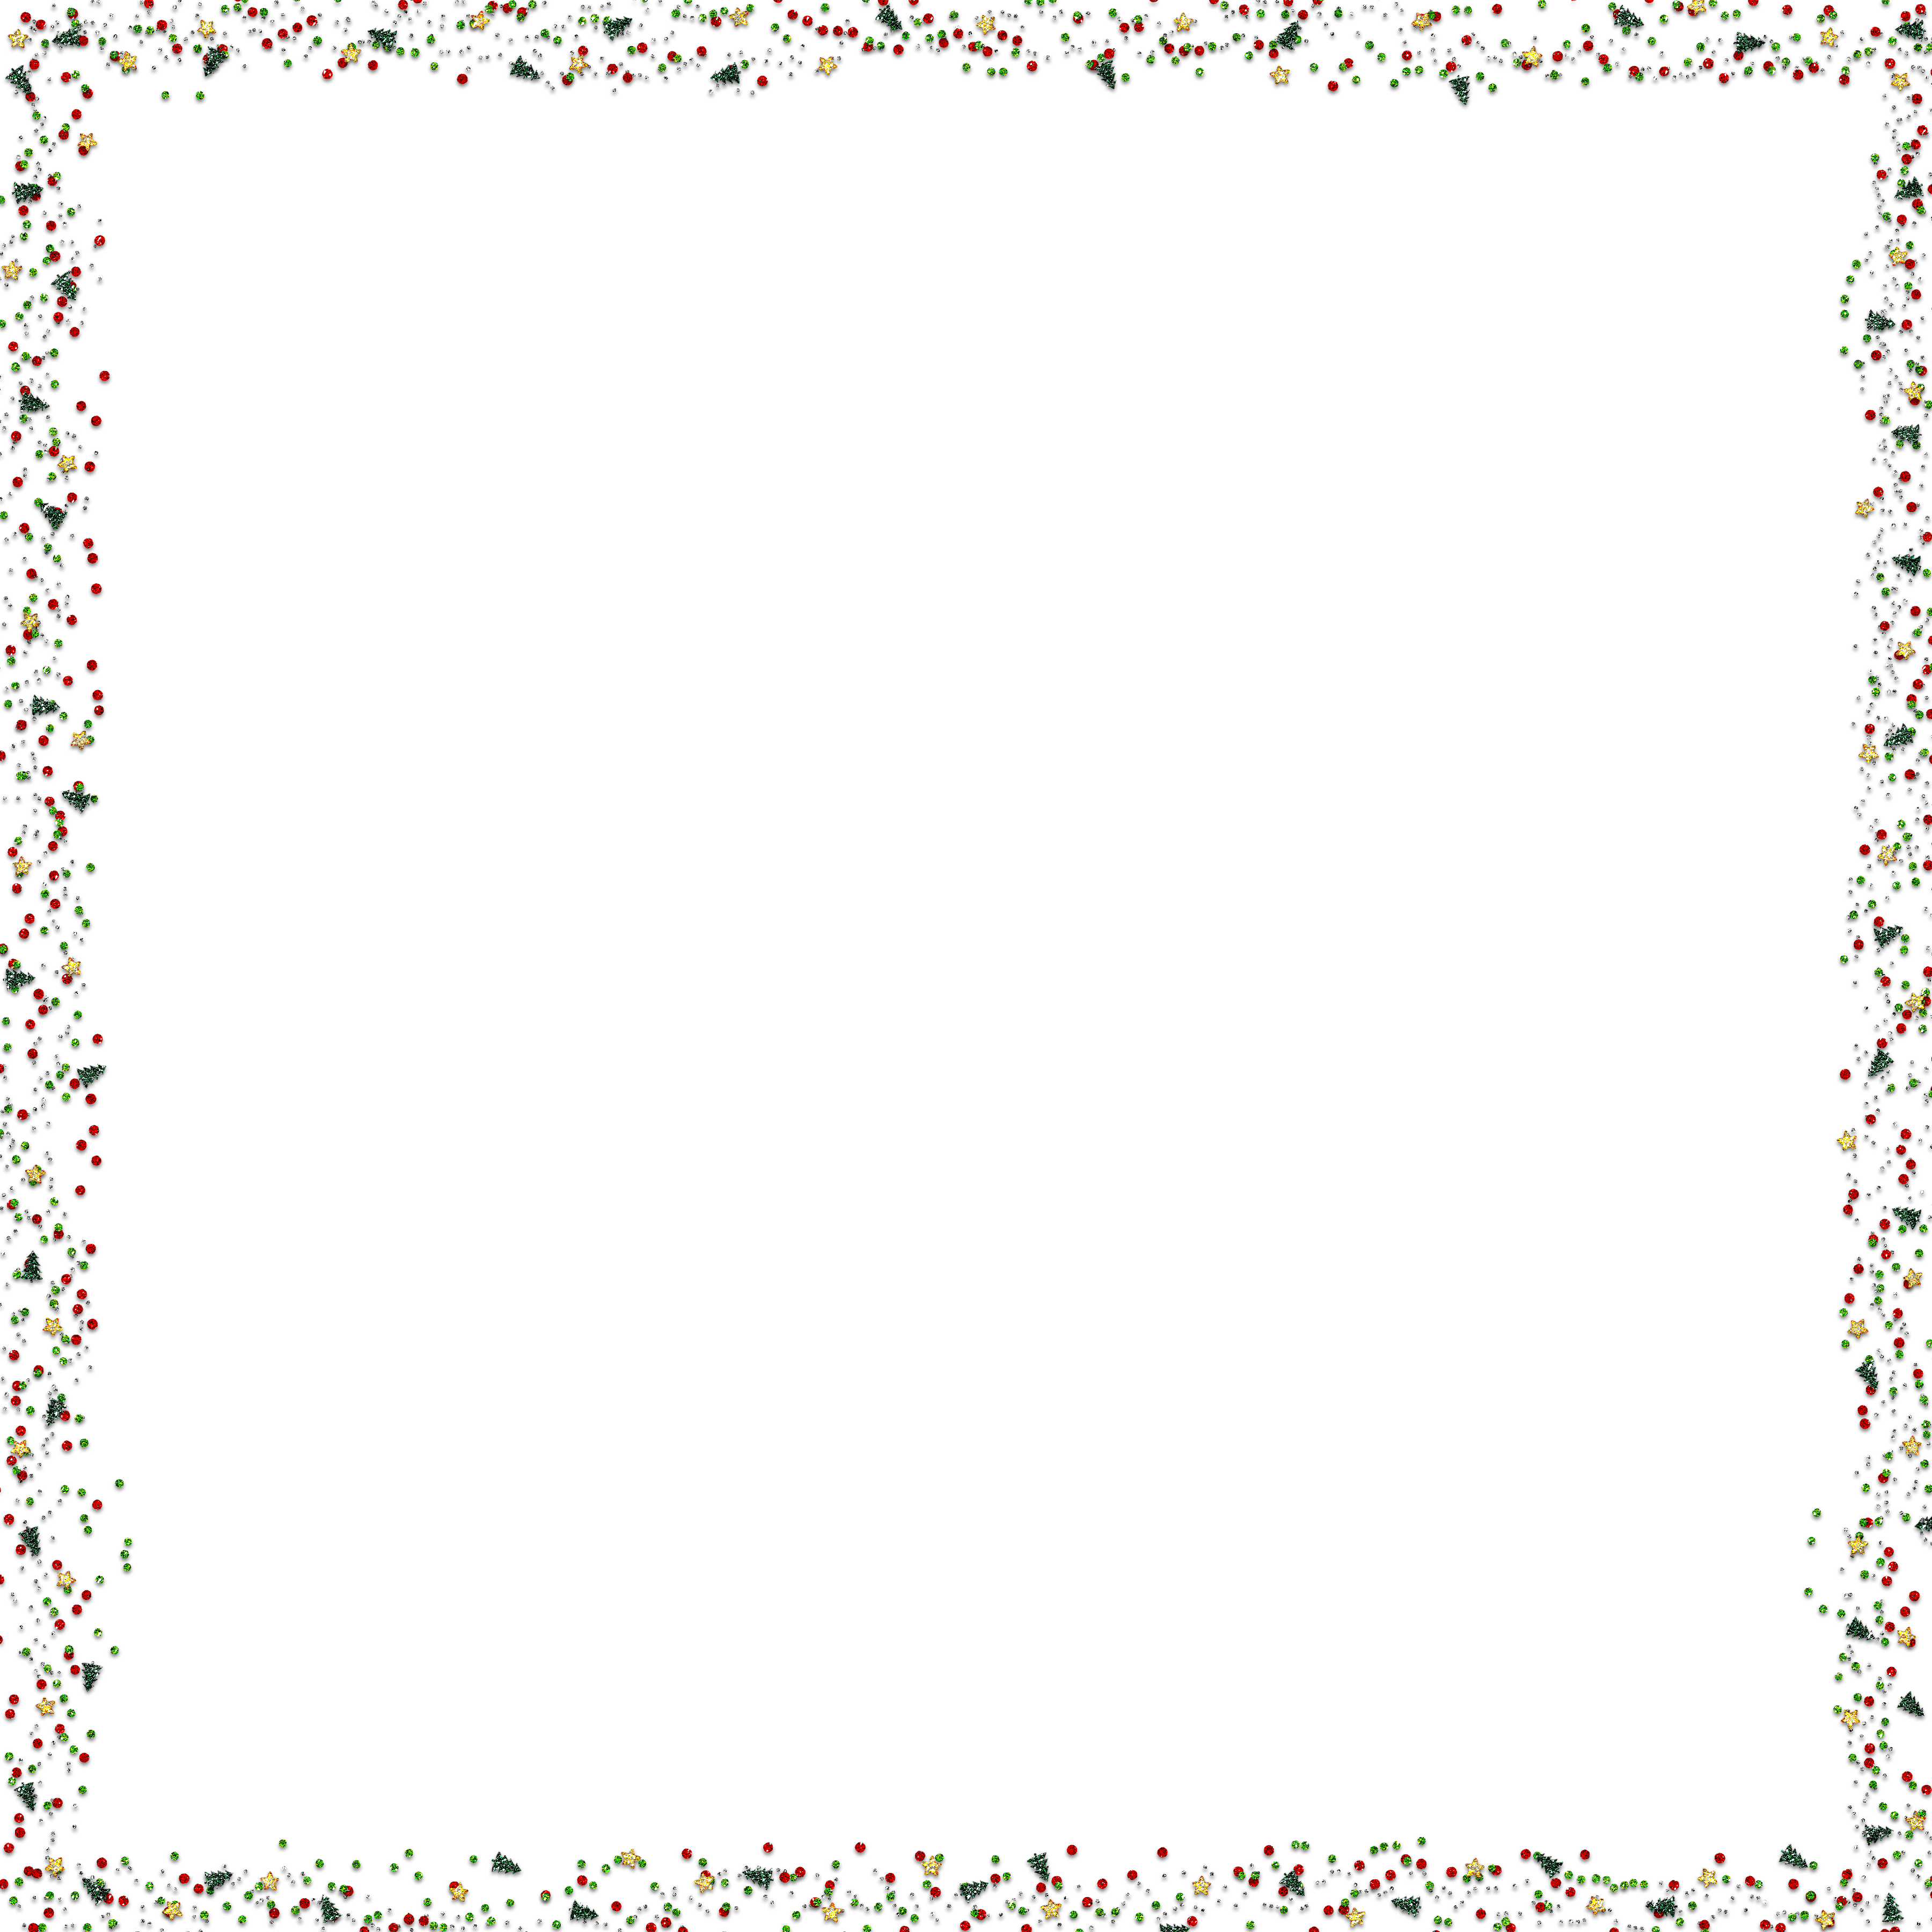  for free download. Glitter border png